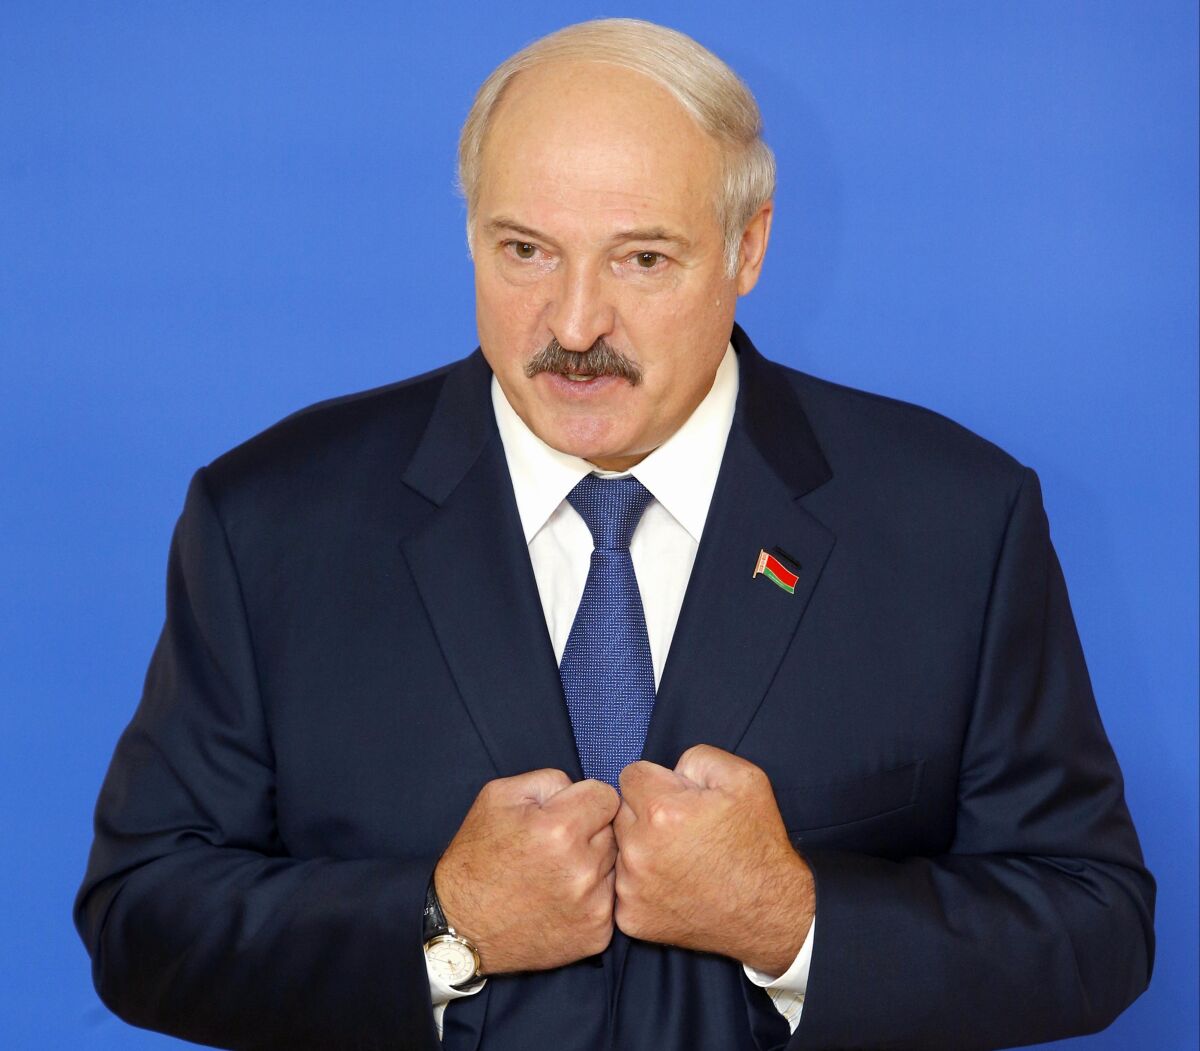 FILE - Belarusian President Alexander Lukashenko speaks to the media at a polling station after voting during the presidential election in Minsk, Belarus on Sunday, Oct. 11, 2015. For most of his 27 years as the authoritarian president of Belarus, Alexander Lukashenko has disdained democratic norms, making his country a pariah in the West and bringing him the sobriquet of “Europe’s last dictator." Now, his belligerence is directly affecting Europe. (AP Photo, File)